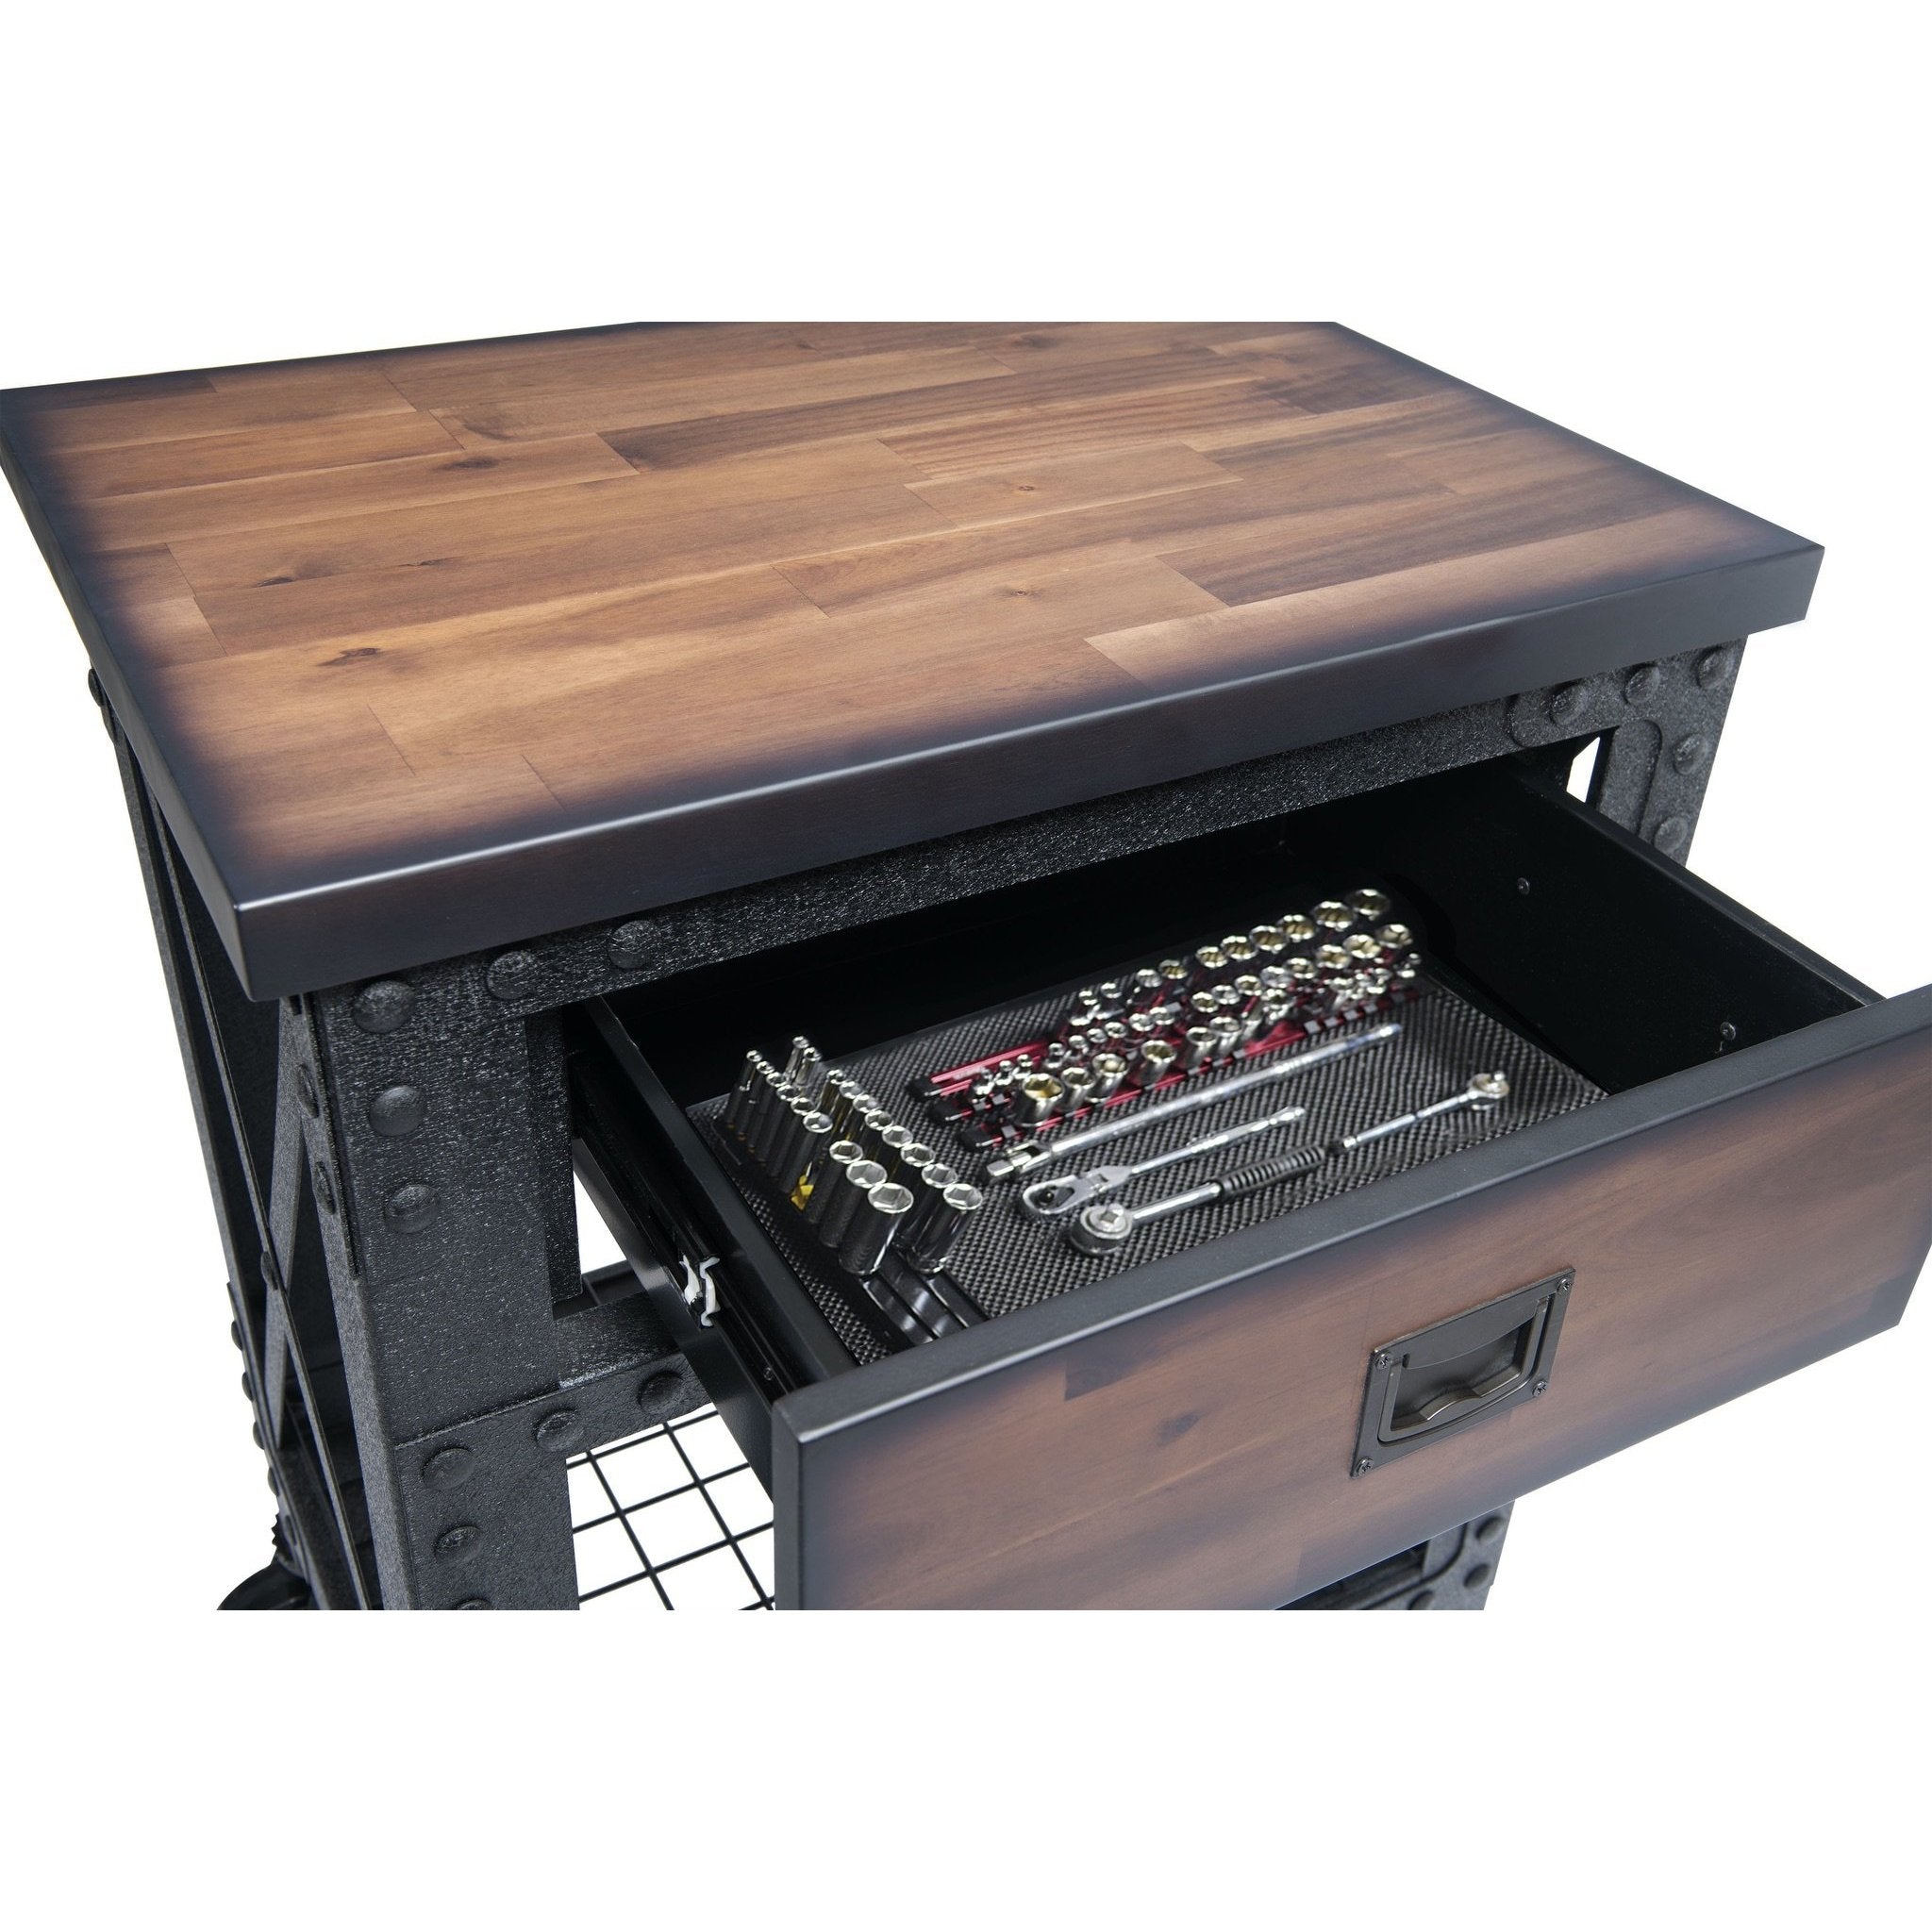 Durasheds furniture Duramax Single Drawer Rolling Workbench 27.6 Inch x 20 Inch for Home, Garage and Workshop